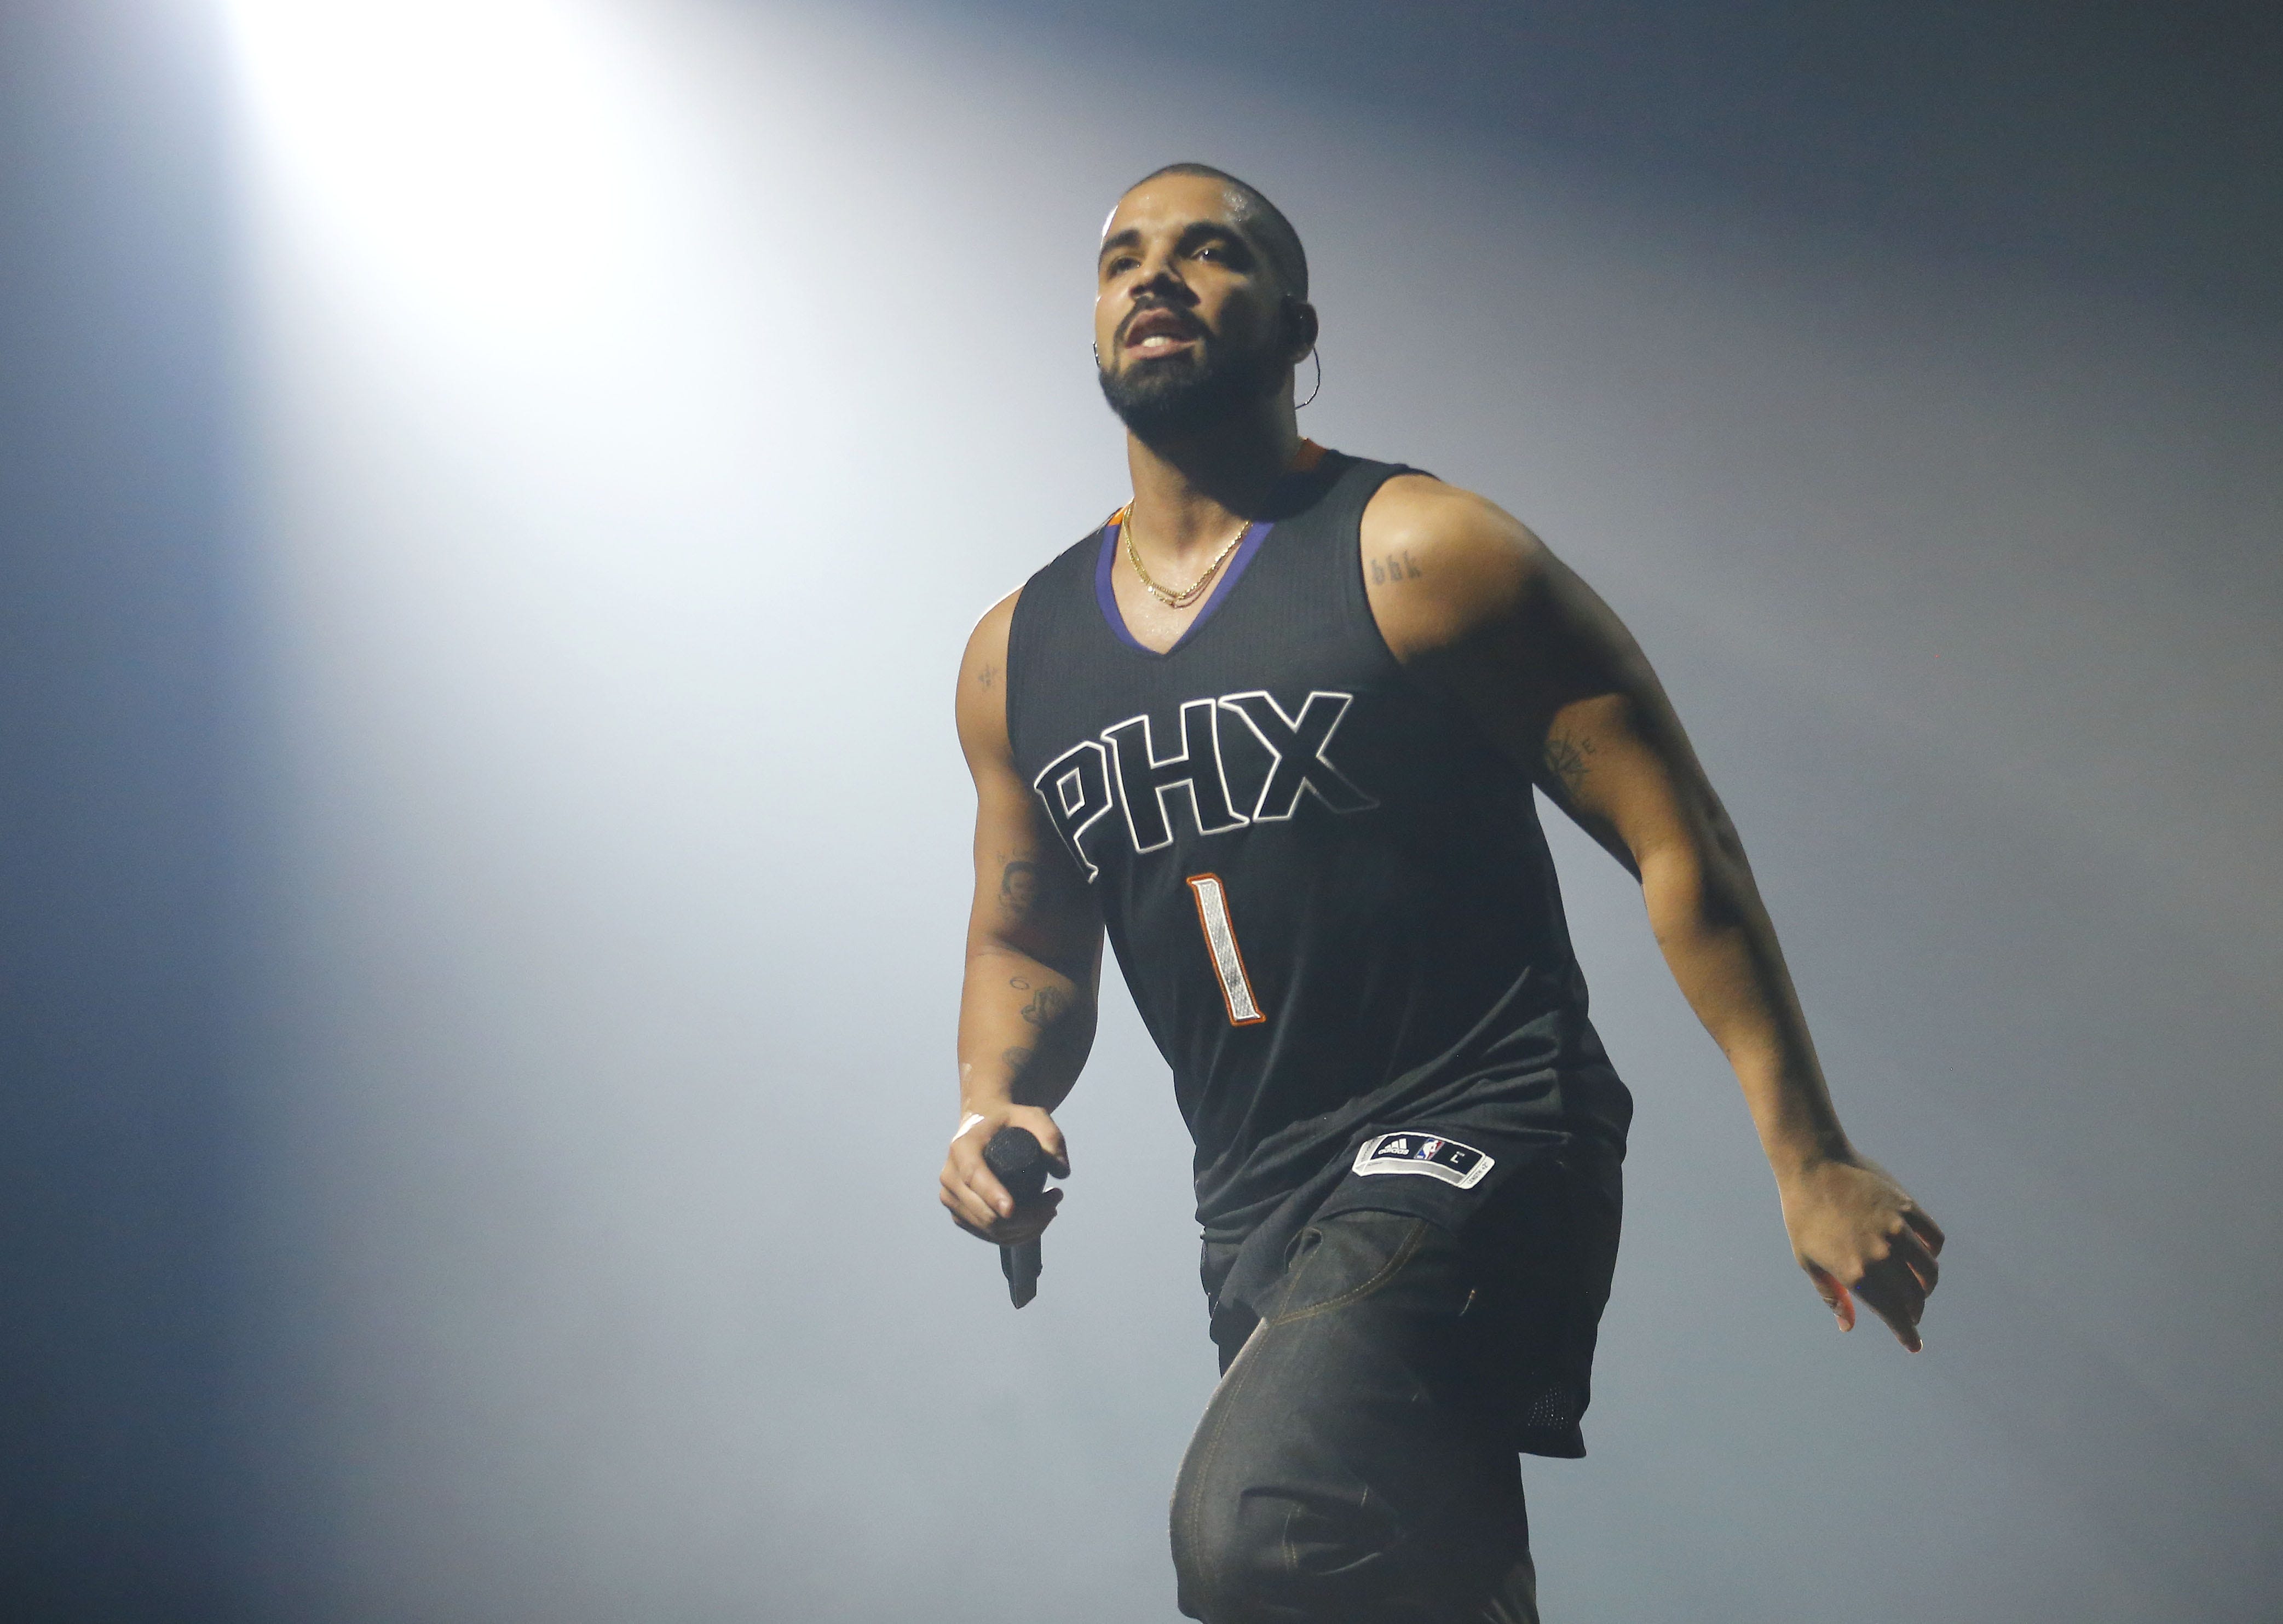 Drake wears Devin Booker jersey at 